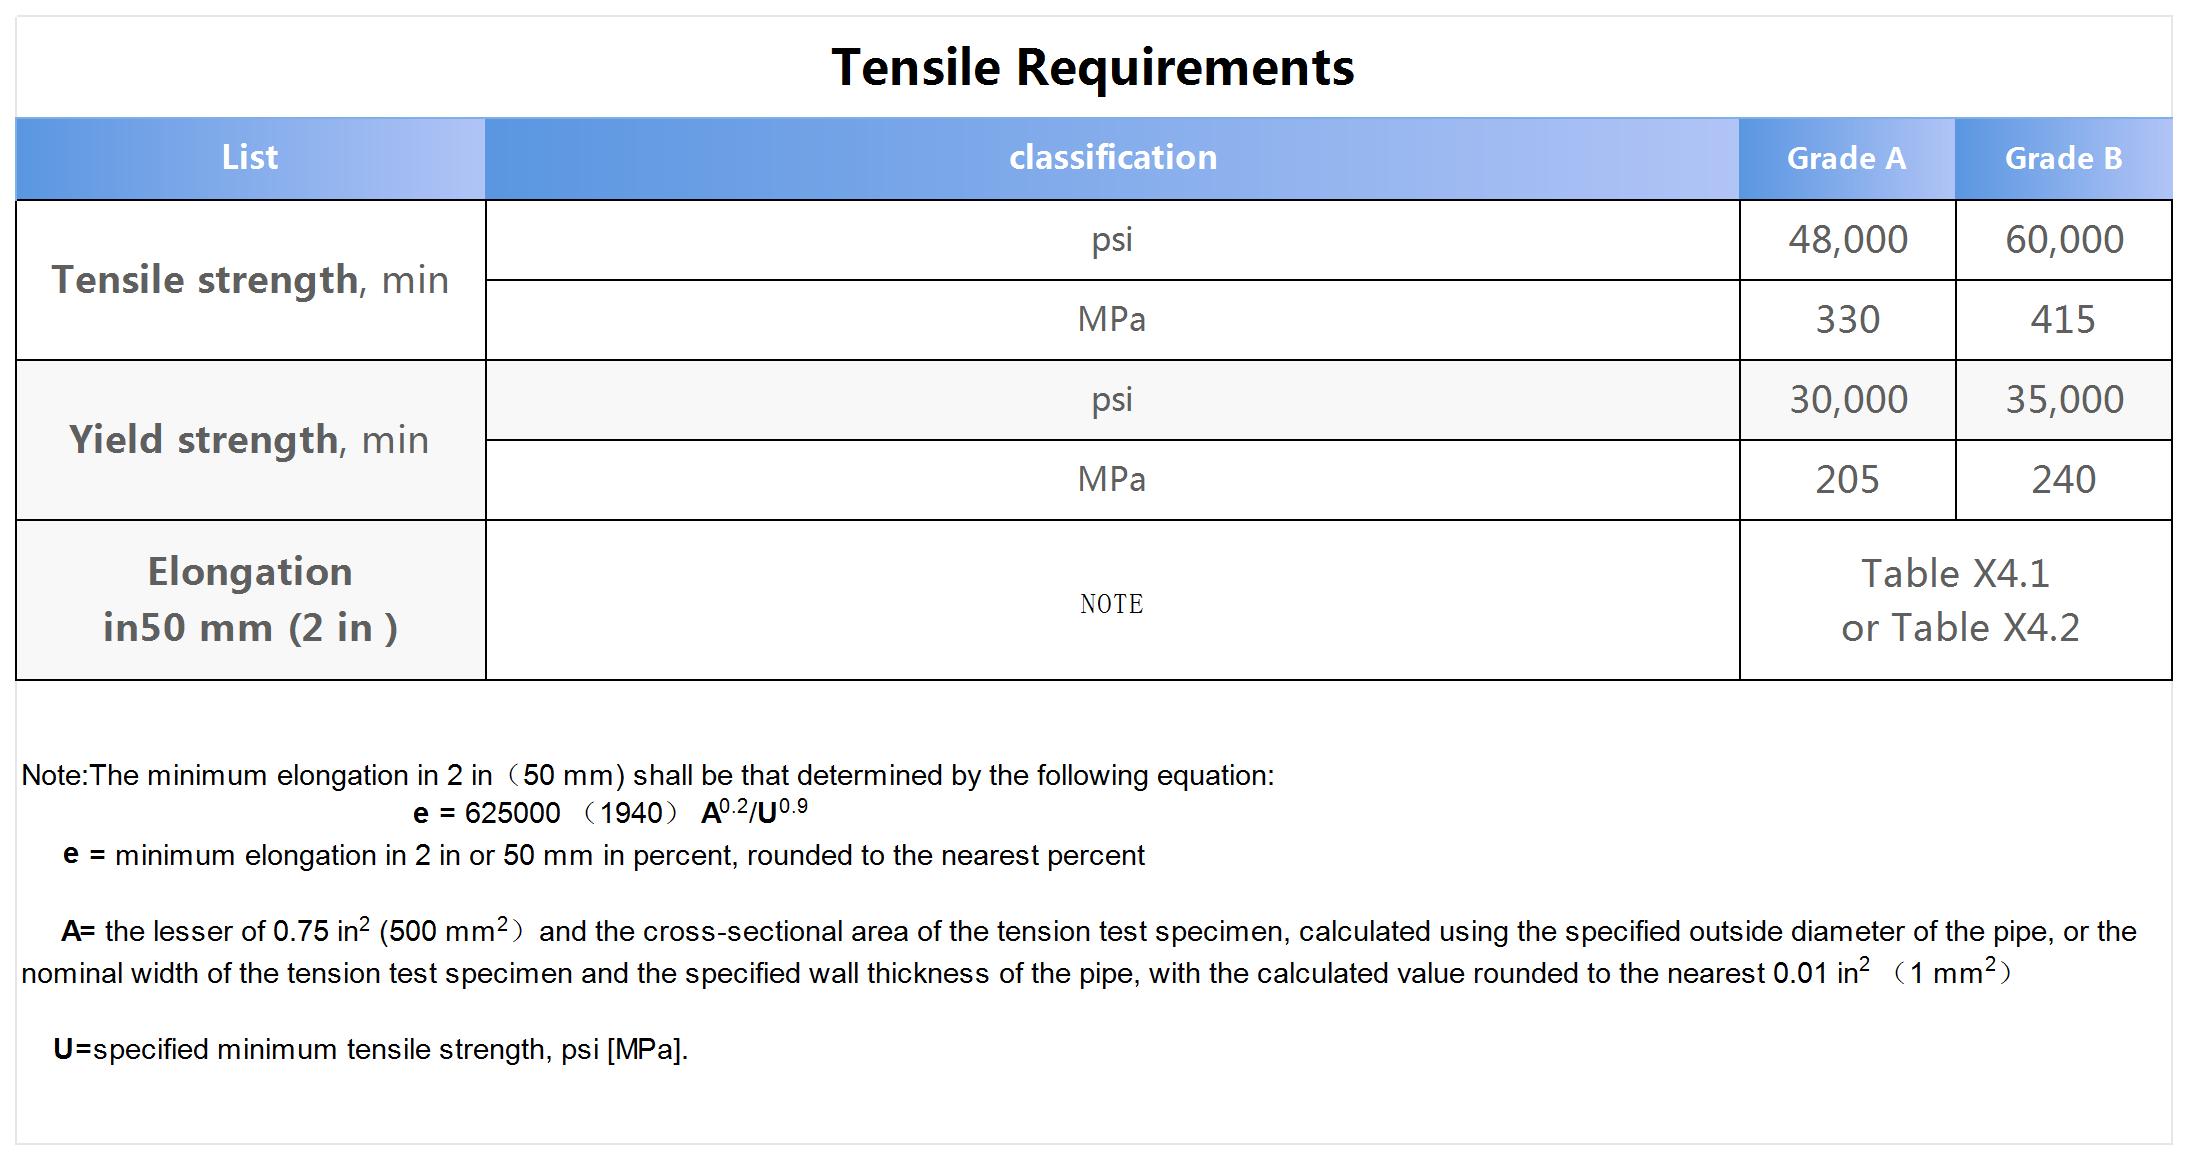 A53_Tensile Requirements